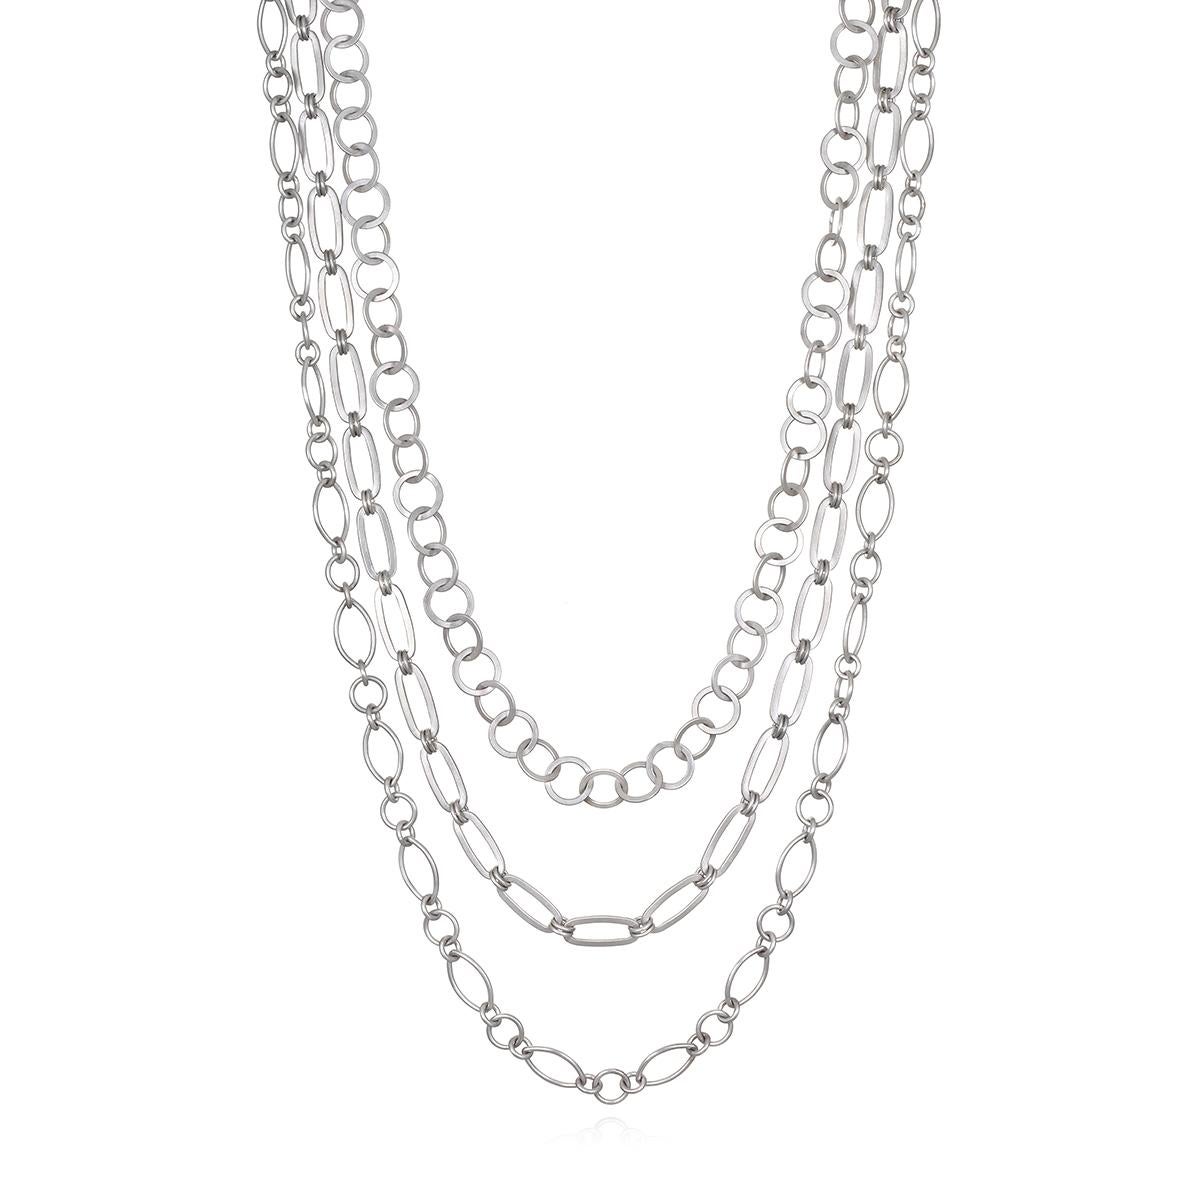 Classic and versatile, Faye Kim's Platinum Planished Paperclip Chain with Round Links is a must have for every jewelry wardrobe. This versatile piece can be worn alone or as a layering piece with other chains and/or a pendant. Matte finished.

Chain